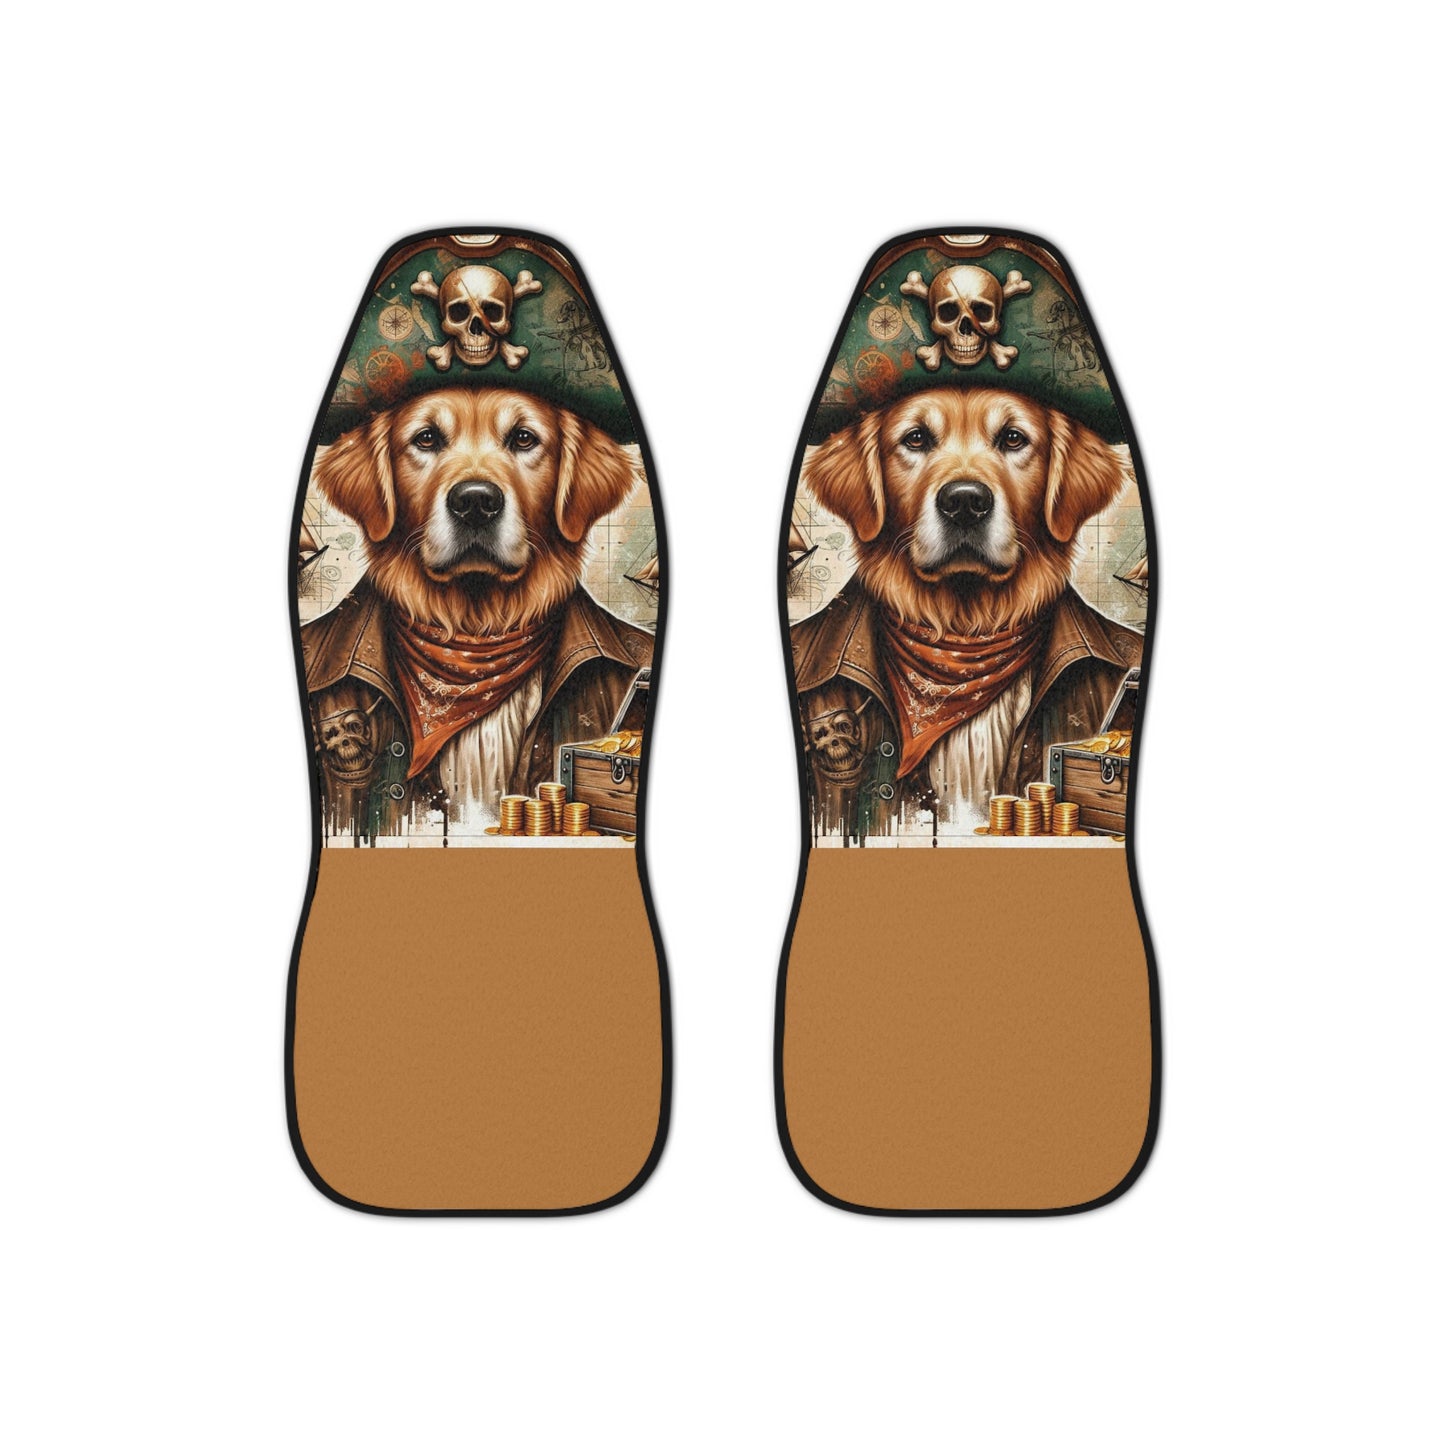 Cute Golden Retriever Dog Pirate-Themed Dog Car Seat Covers - Durable Polyester, Easy Install, Secure Fit - Perfect for Pet Lovers, Set of 2